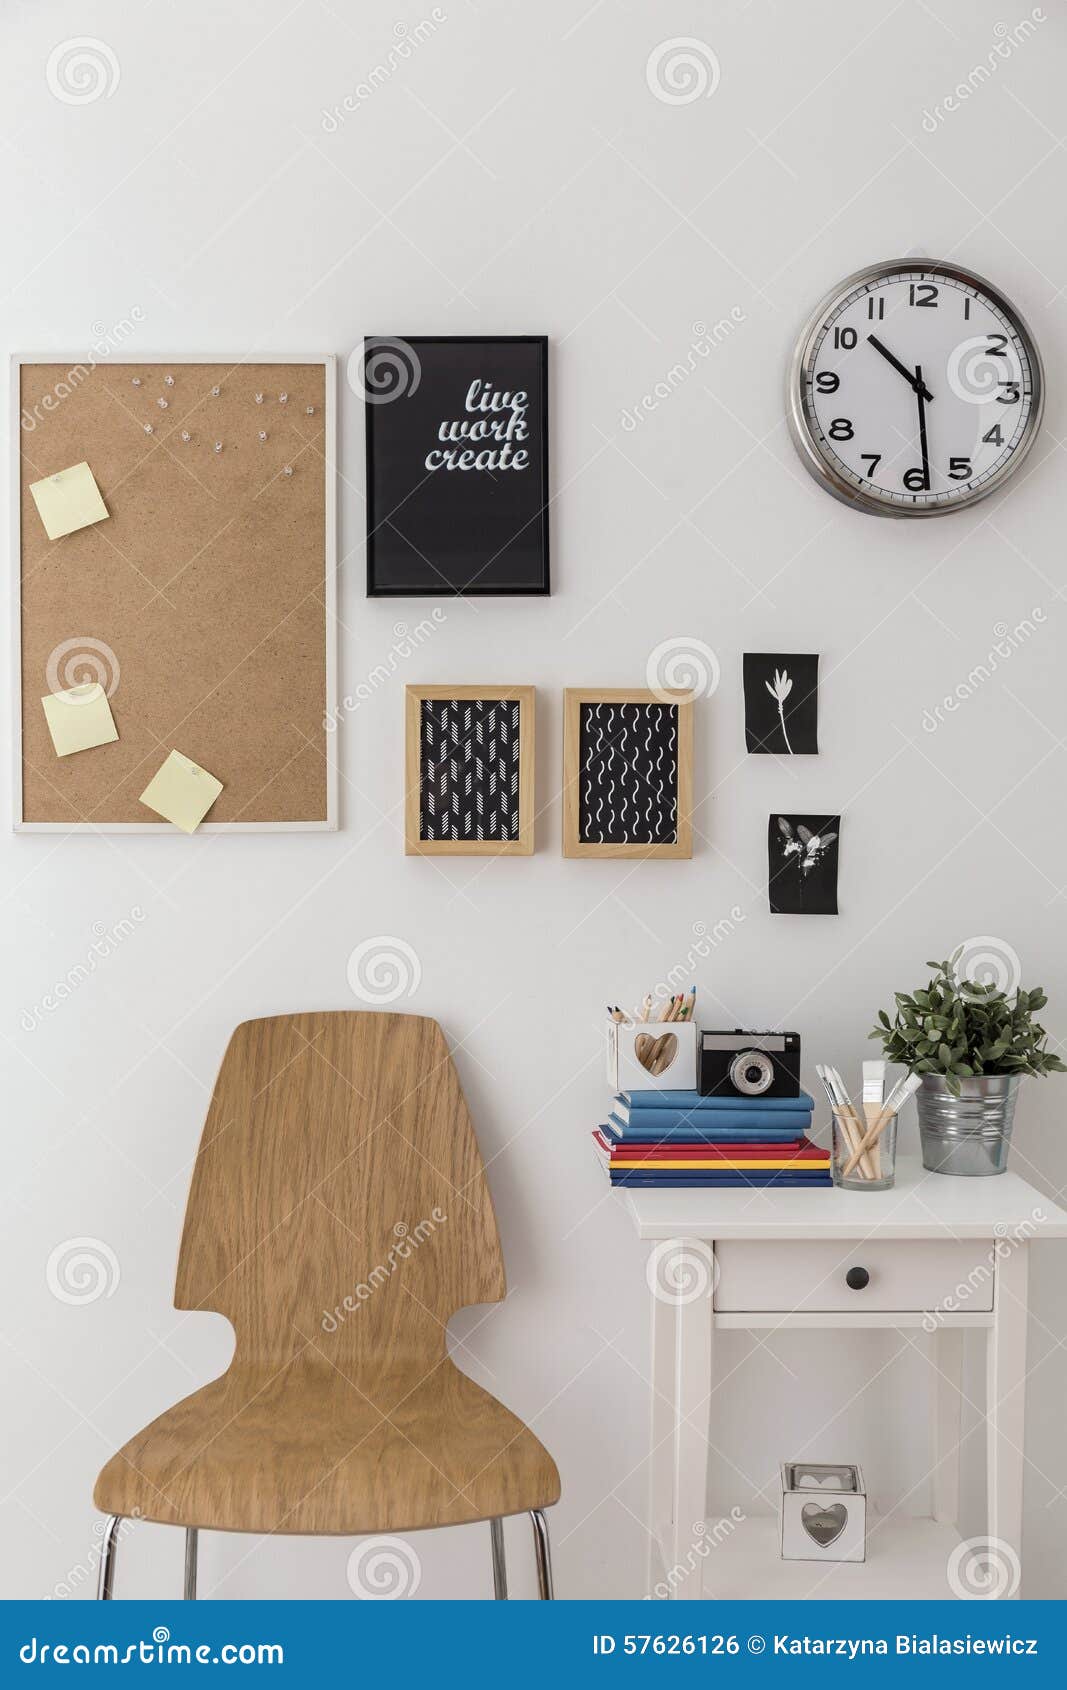 Bulletin Board and Wooden Chair Stock Photo - Image of ...